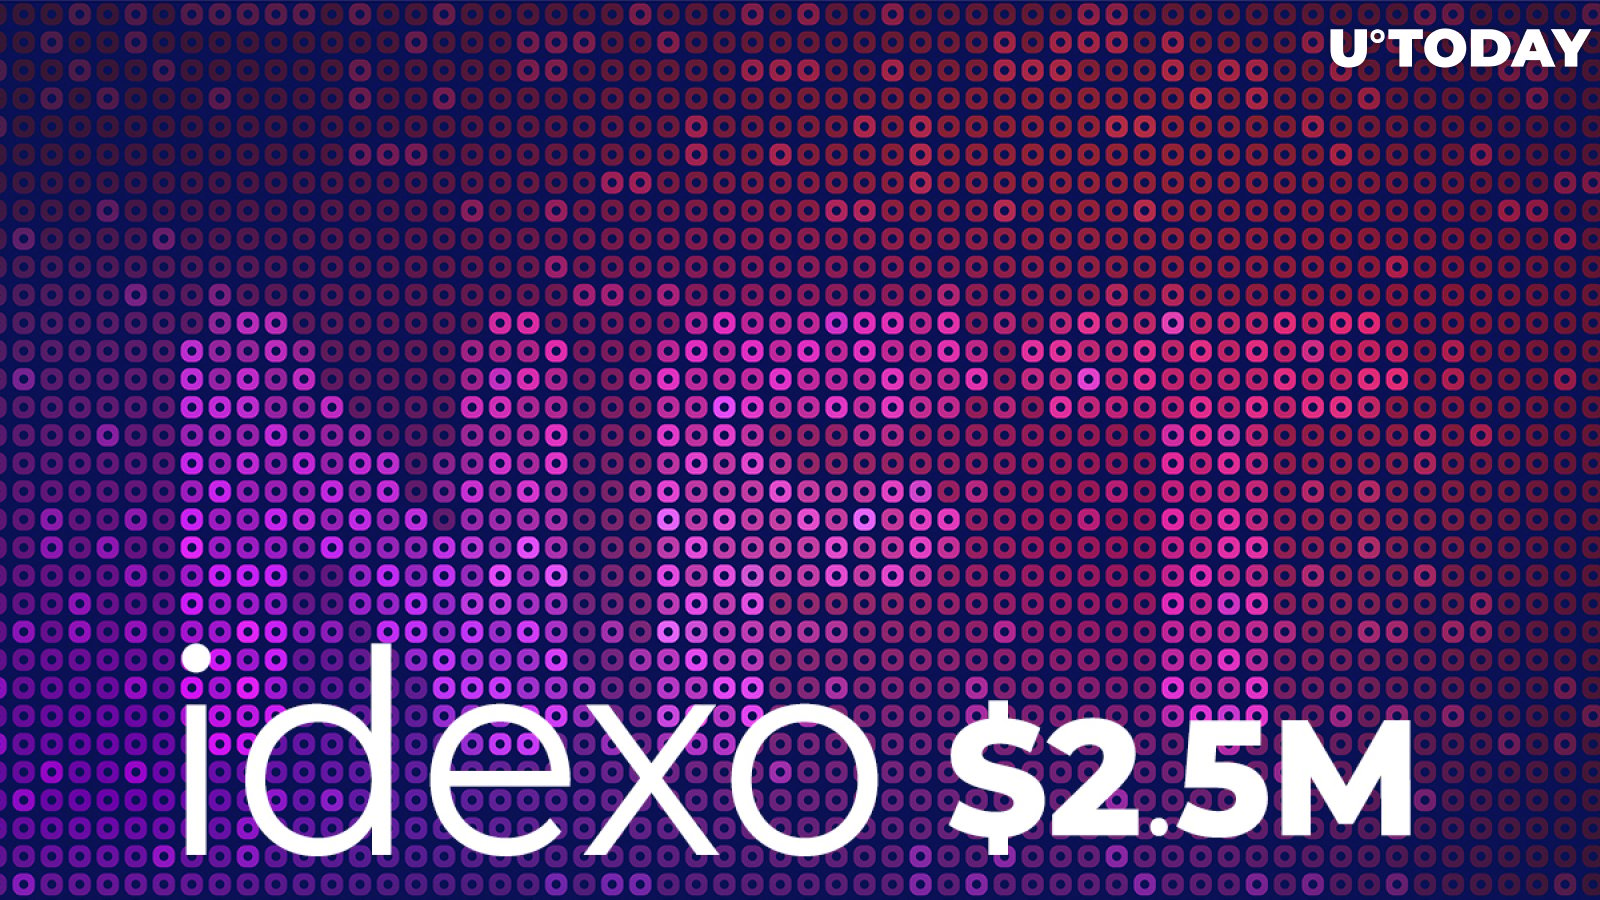 idexo Secures $2.5 Million in Funding to Build Cross-Chain NFT and Gaming API